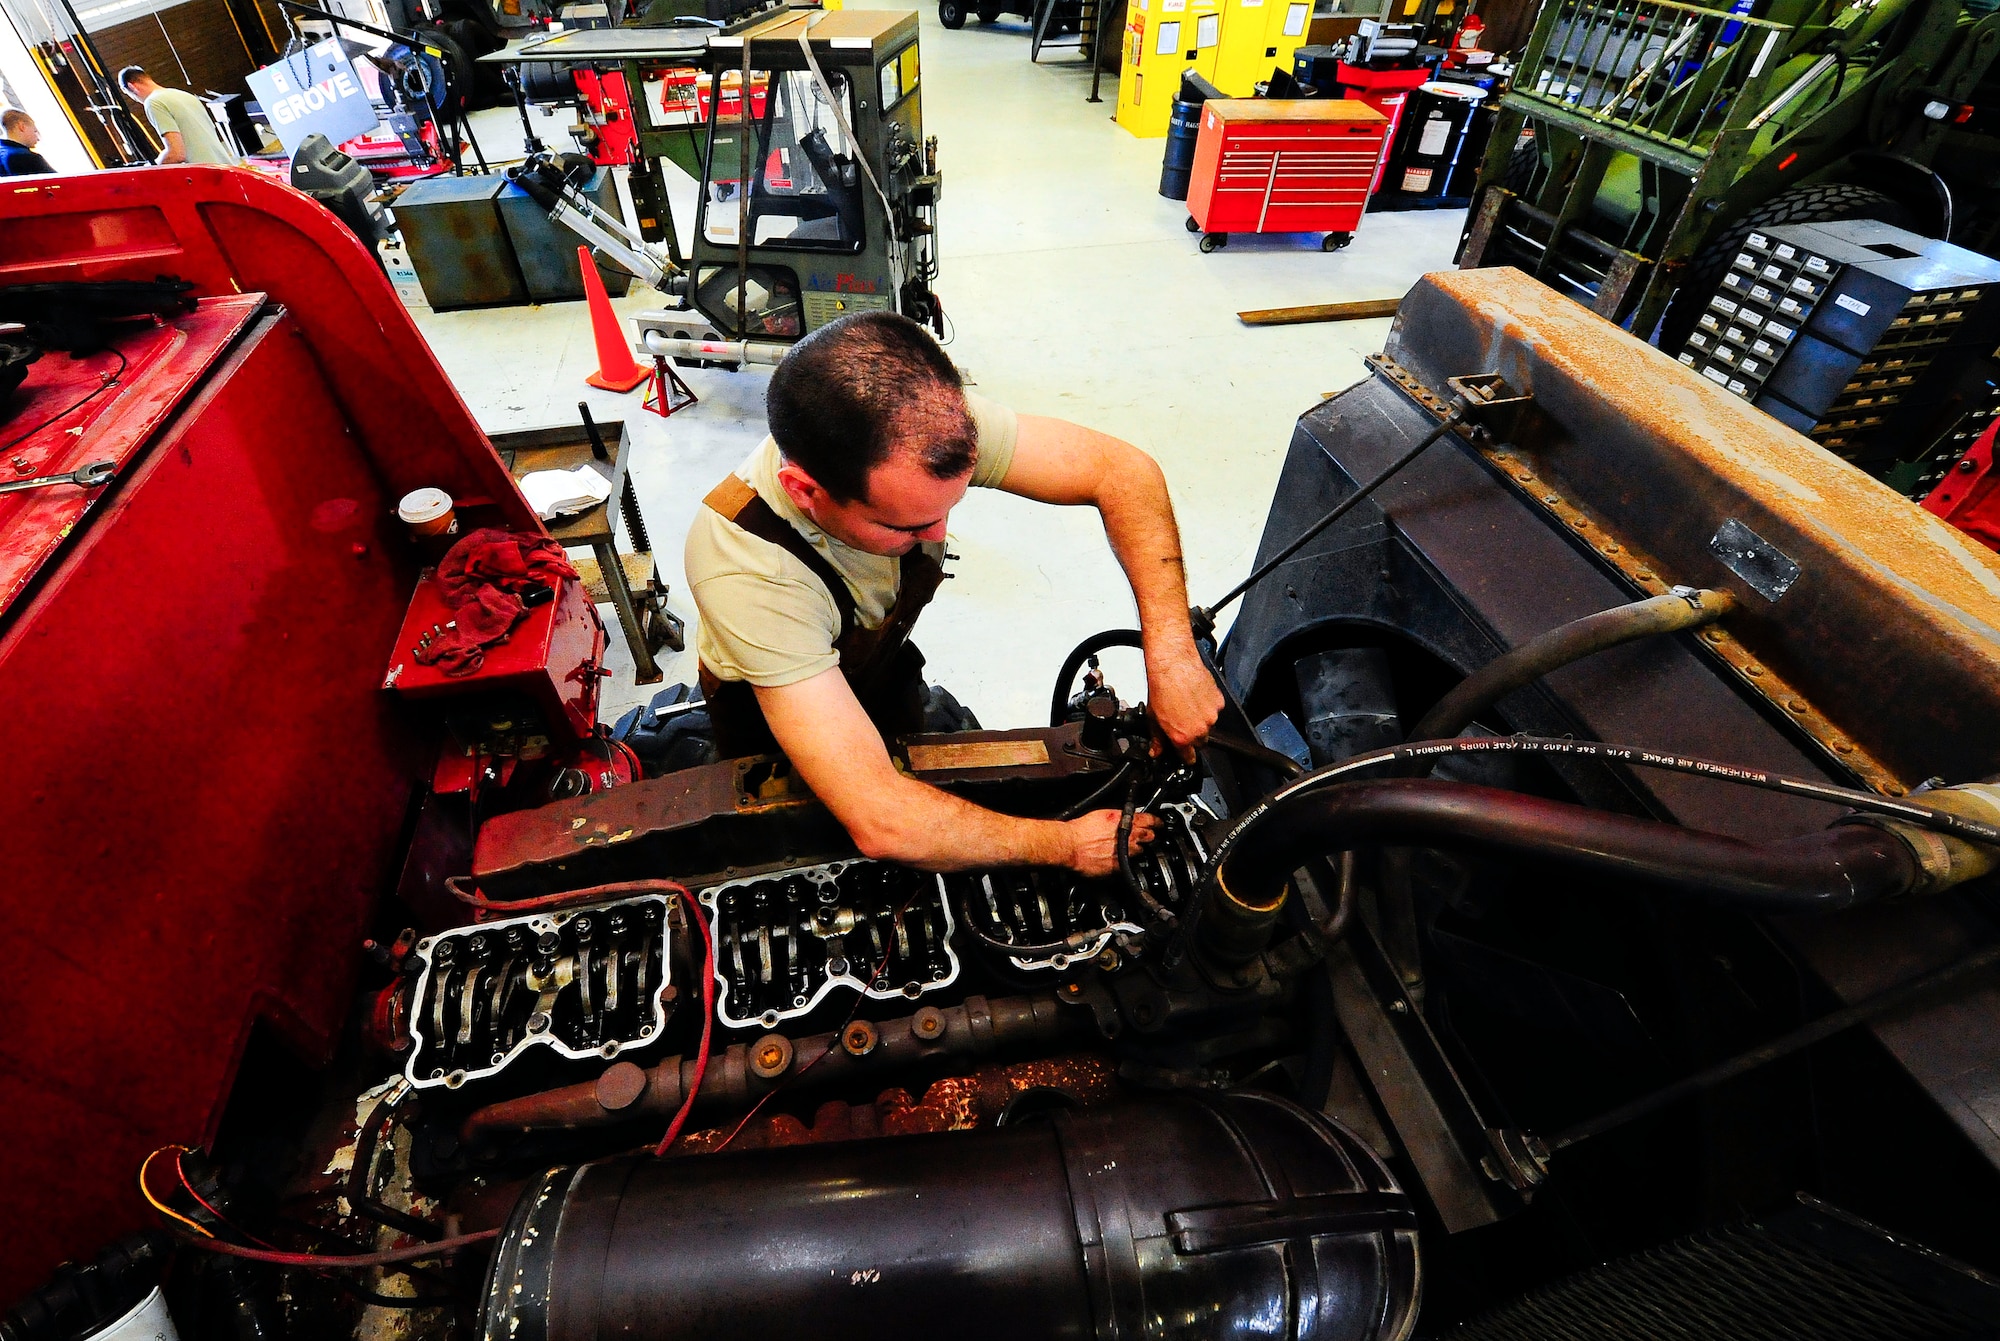 Staff Sgt. Nicholas Cawley, 1st Special Operations Logistics Readiness Squadron vehicle equipment journeyman, fixes the water pump on a fire truck at Hurlburt Filed, Fla., Jan. 21, 2015. 1SOLRS provides maintenance for vehicles such as humvees, firetrucks and K-loaders. (U.S. Air Force photo/Airman 1st Class Andrea Posey)